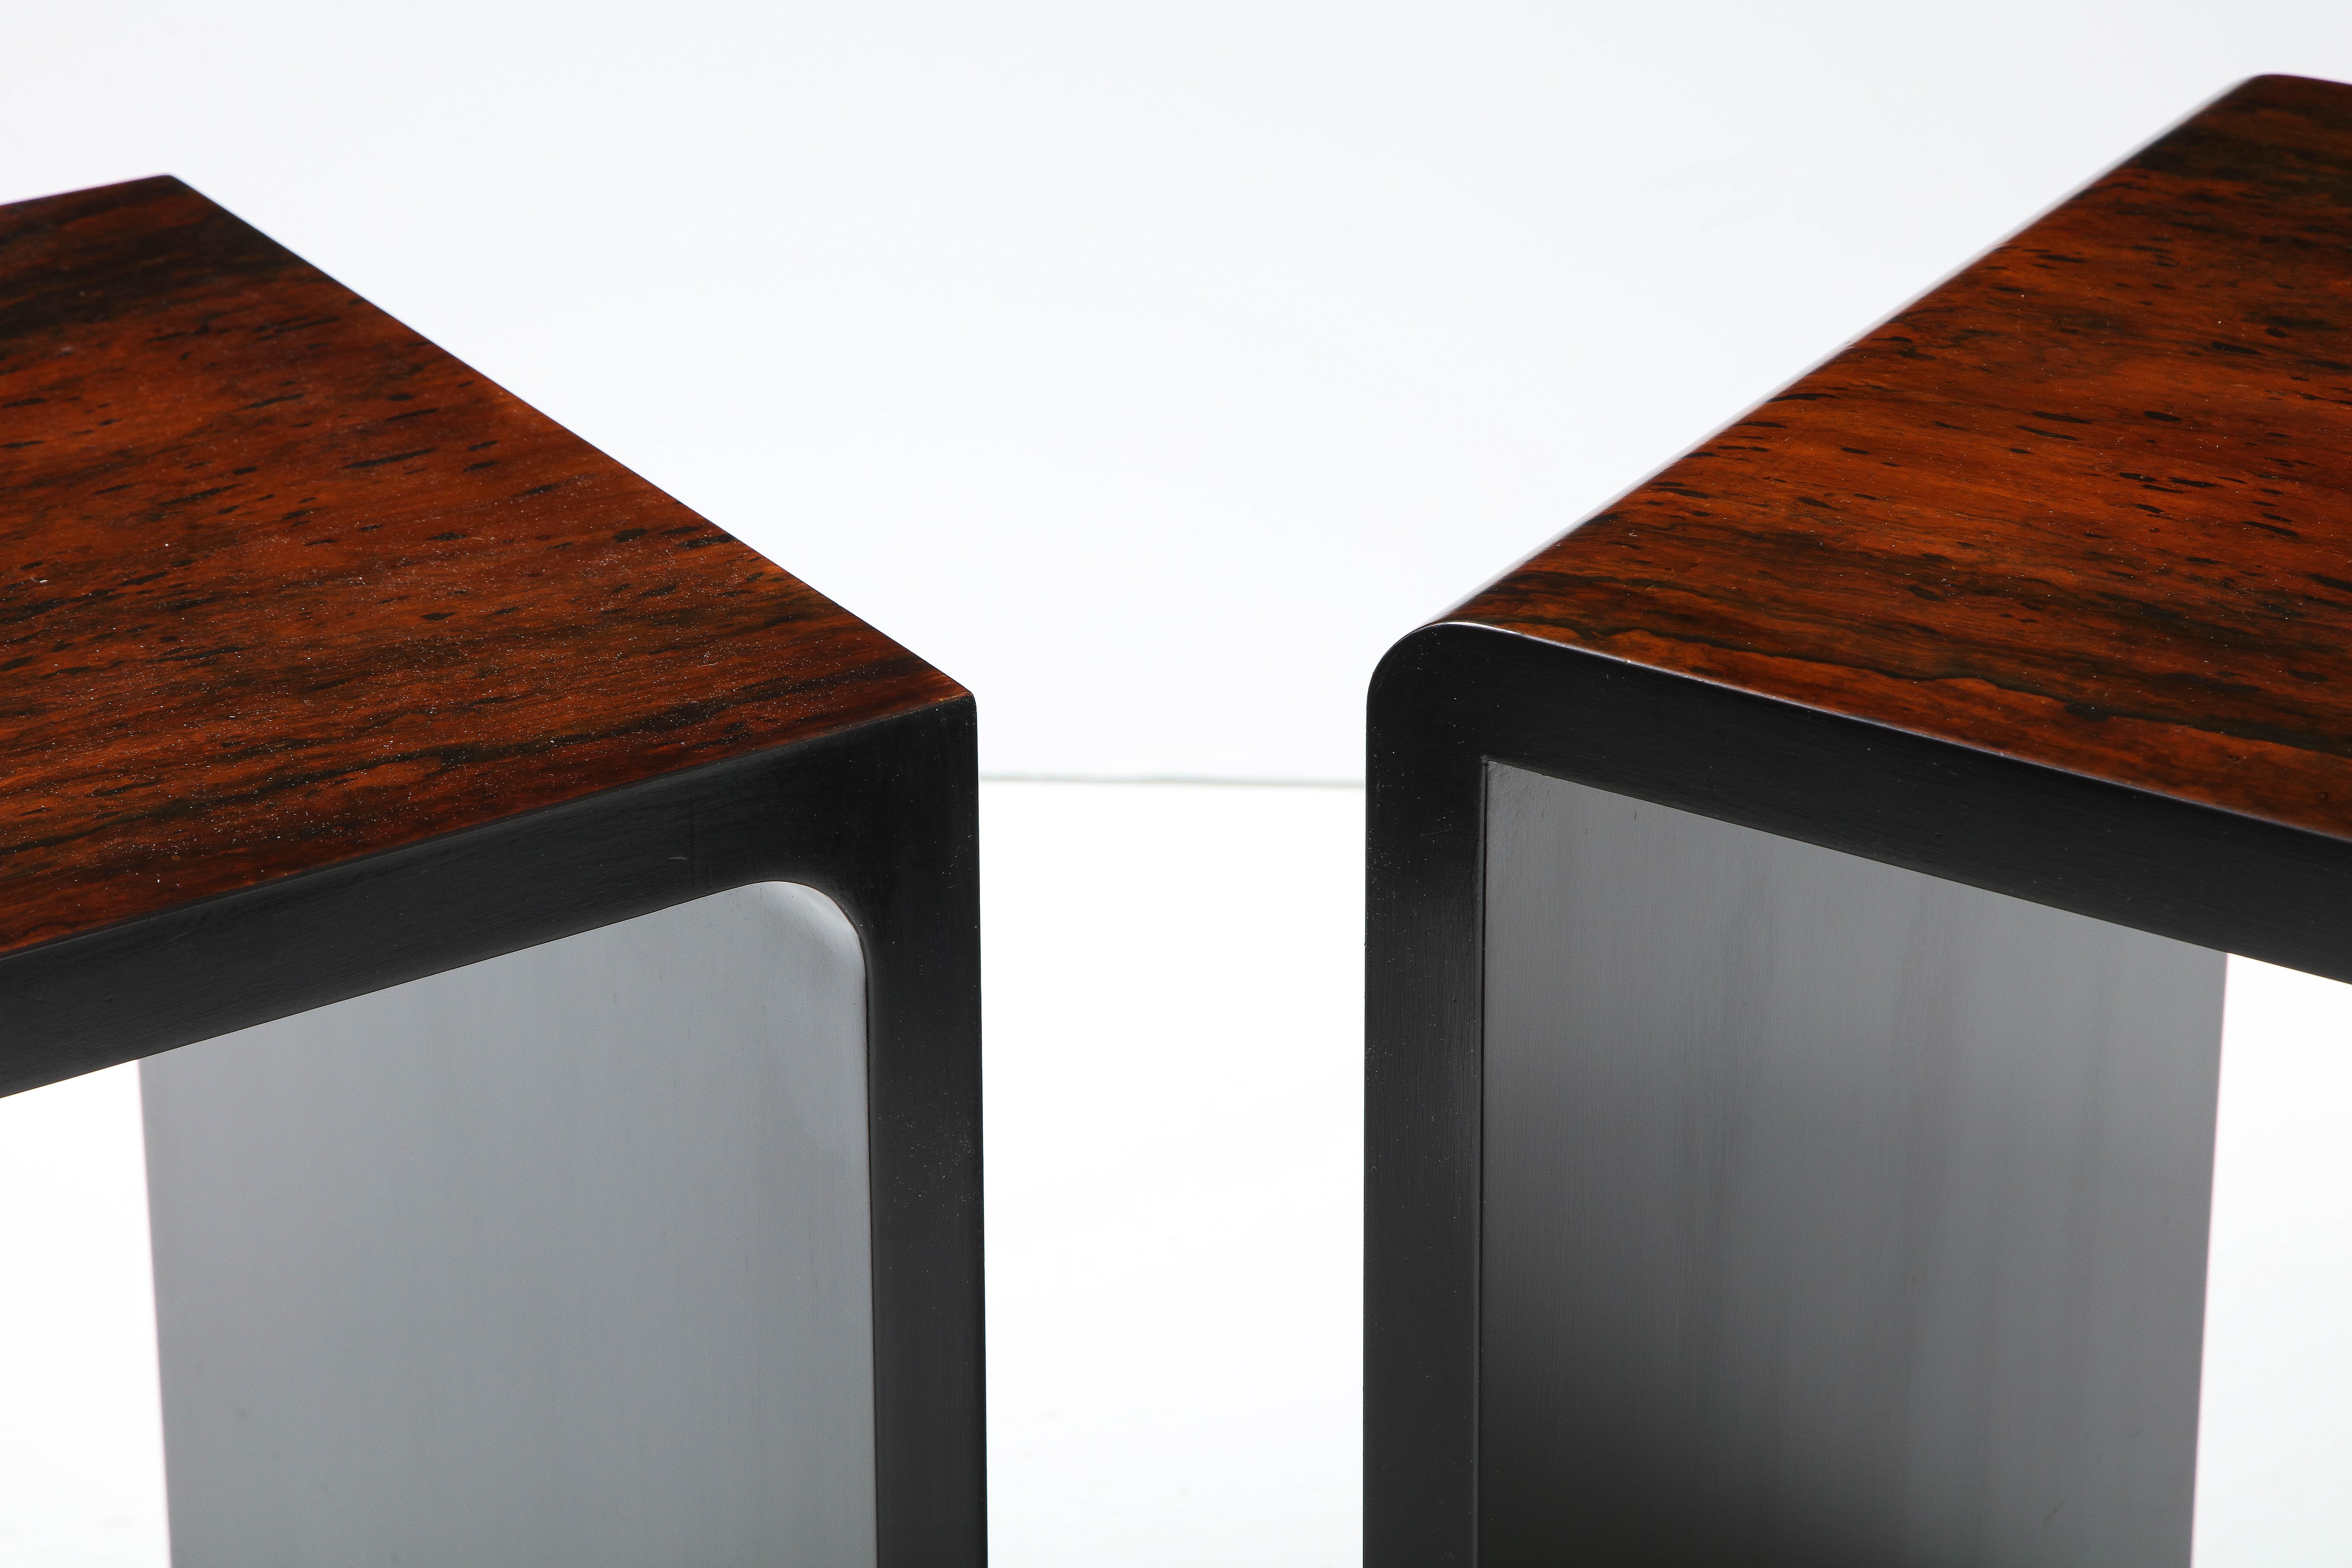 Set of Italian Rosewood and Ebony Lacquered Nesting Tables, circa 1970 For Sale 5